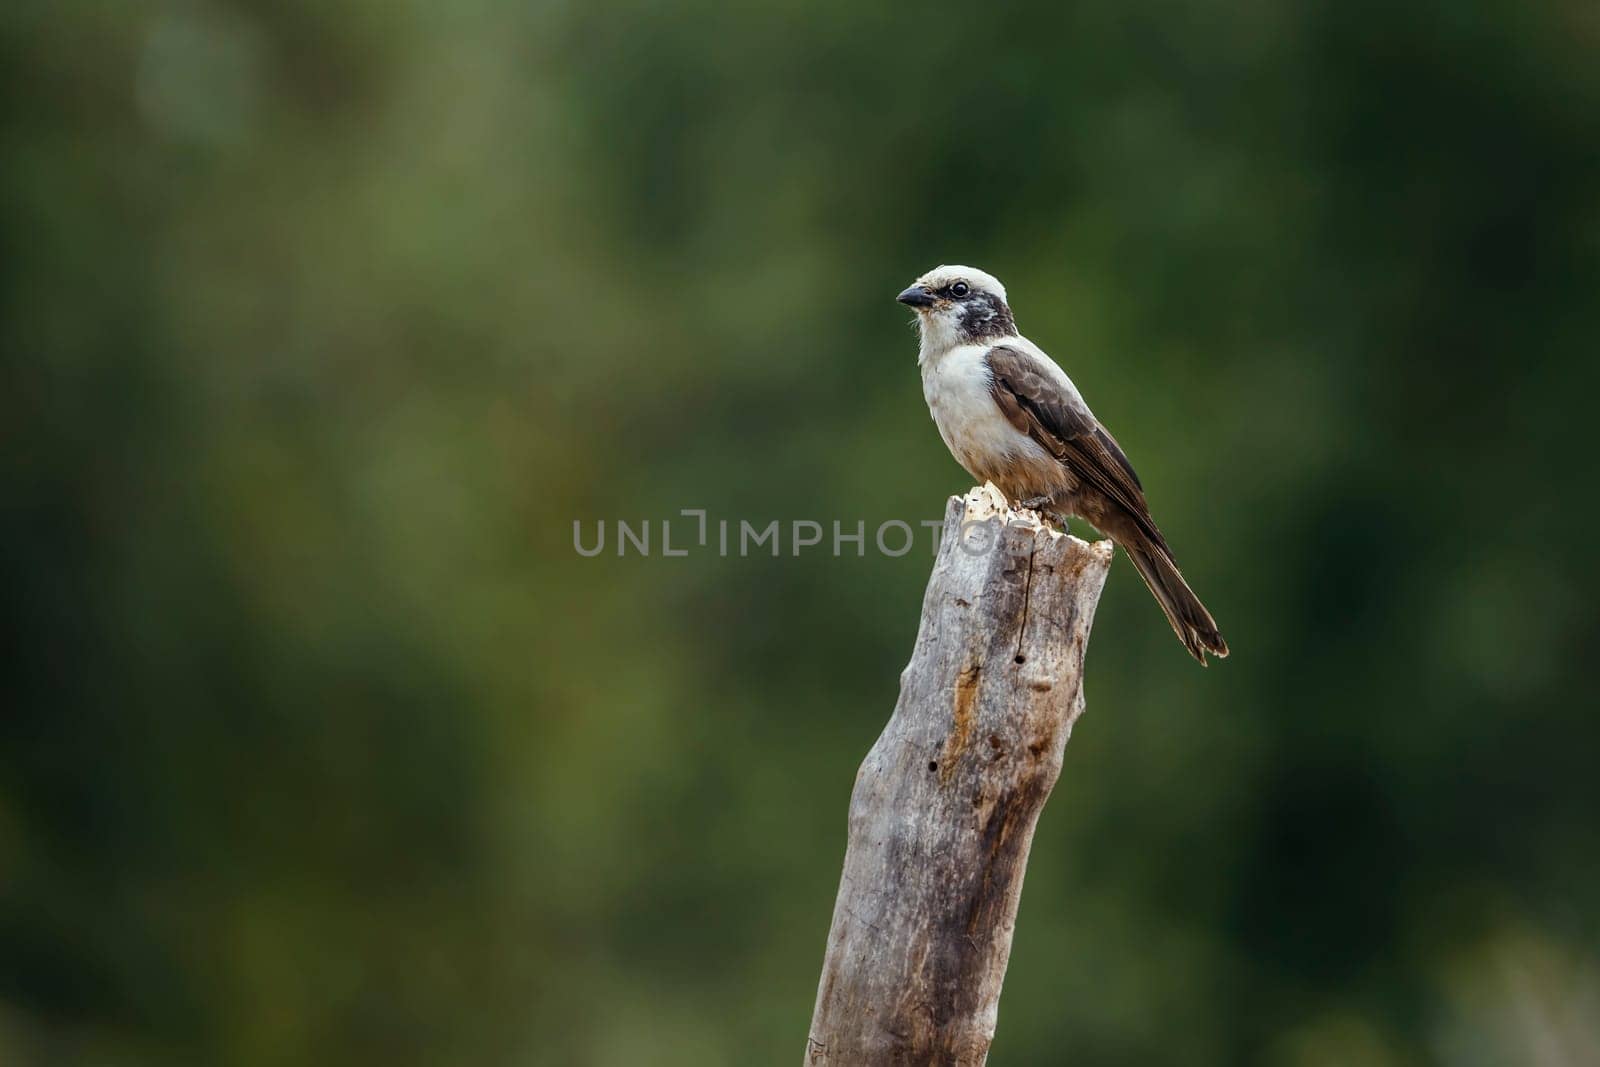 White crowned Shrike standing on a log isolated in natural background in Kruger National park, South Africa ; Specie Eurocephalus anguitimens family of Laniidae